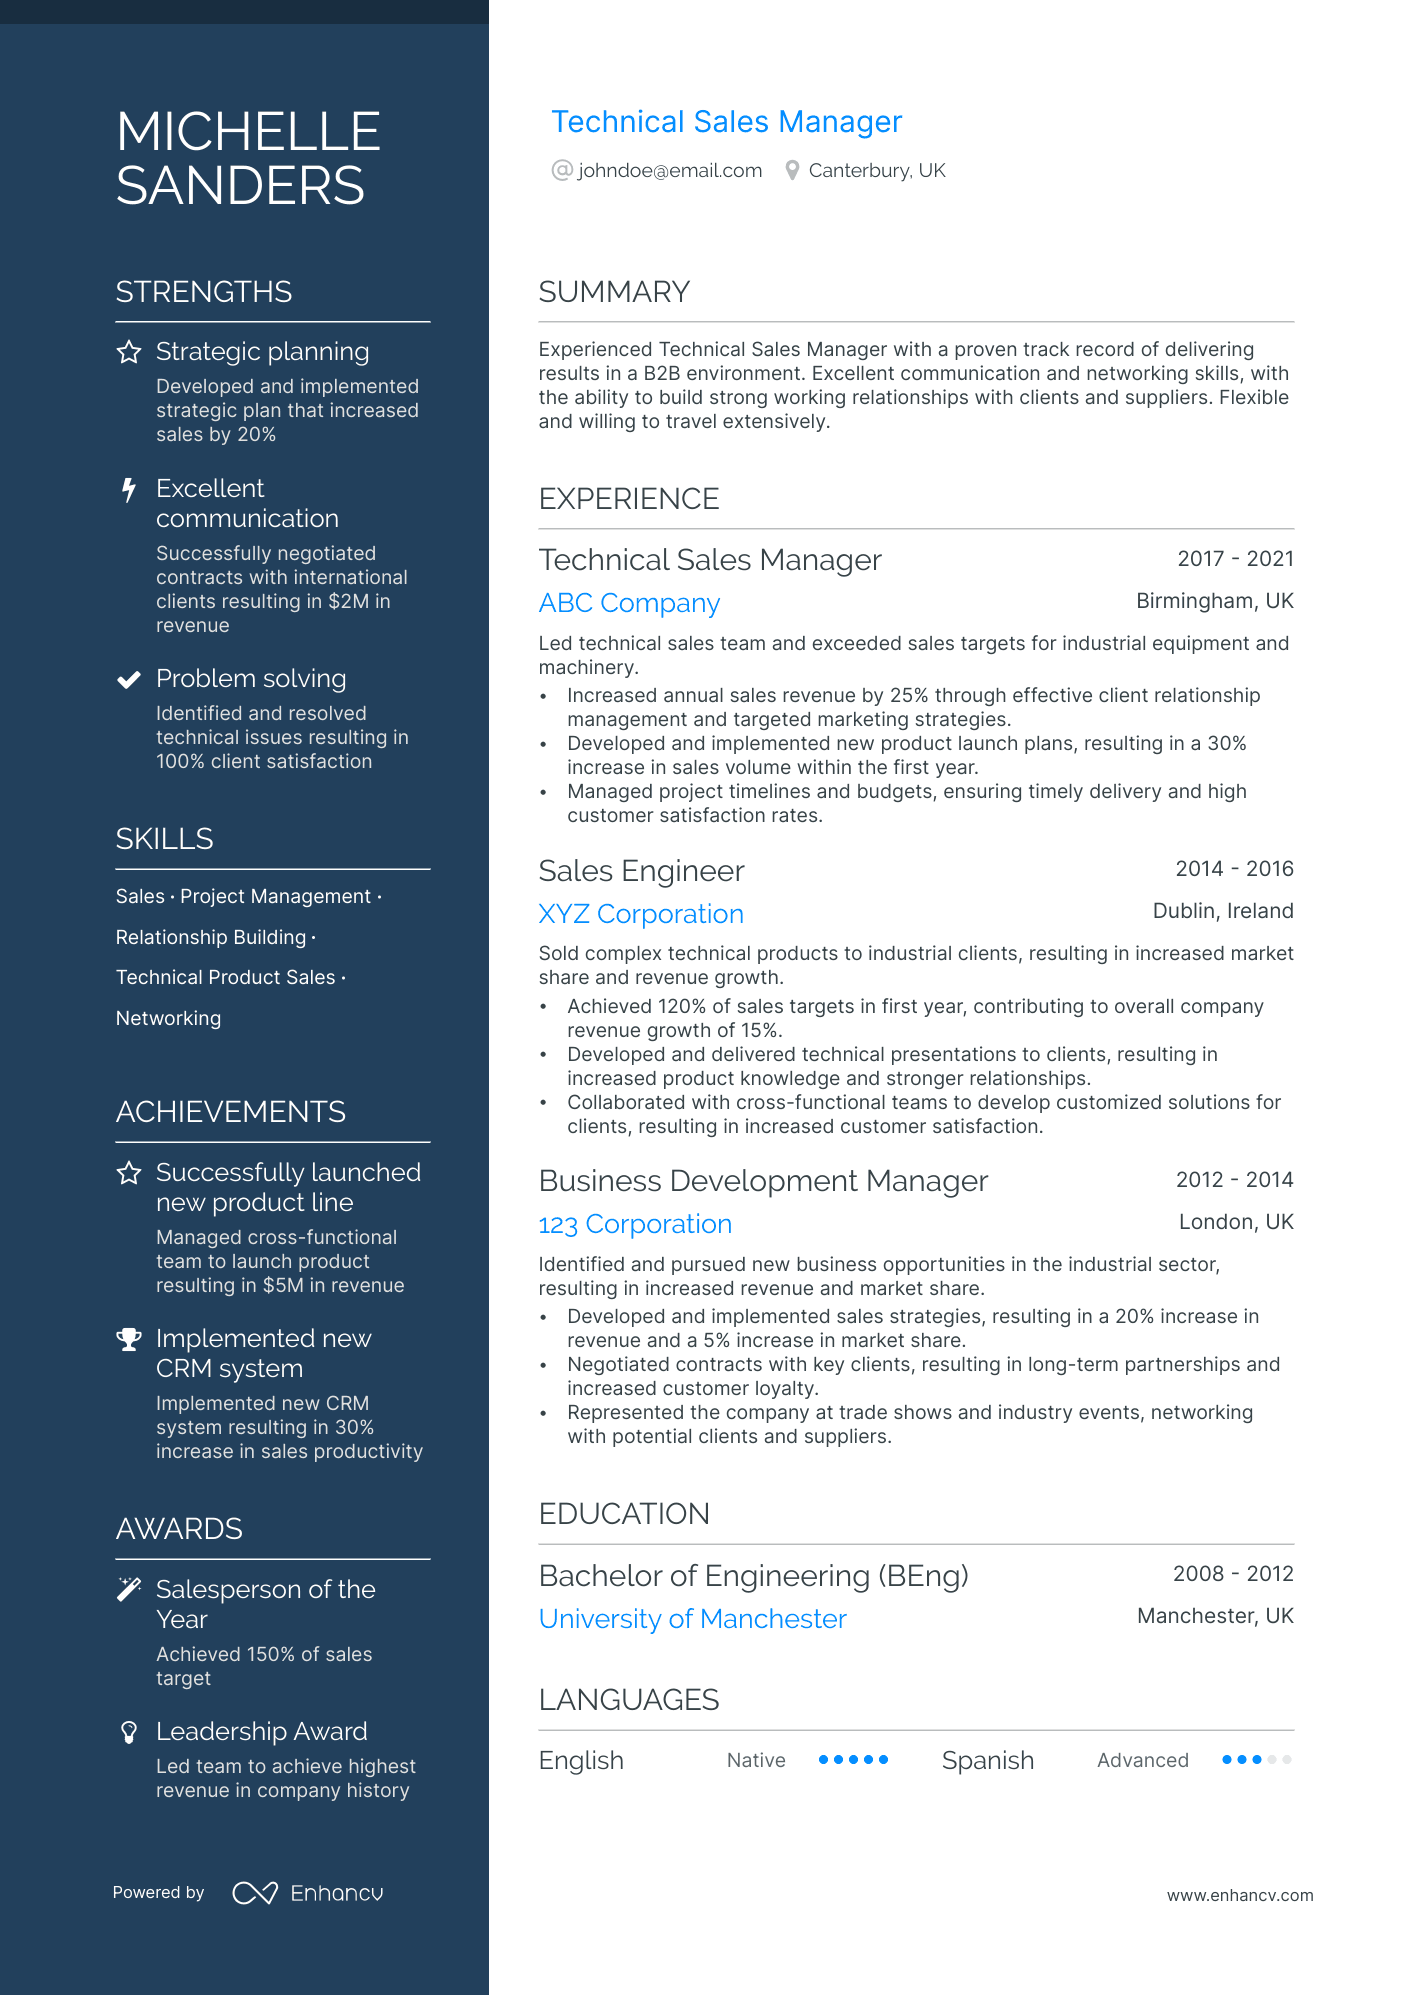 technical sales manager resume example